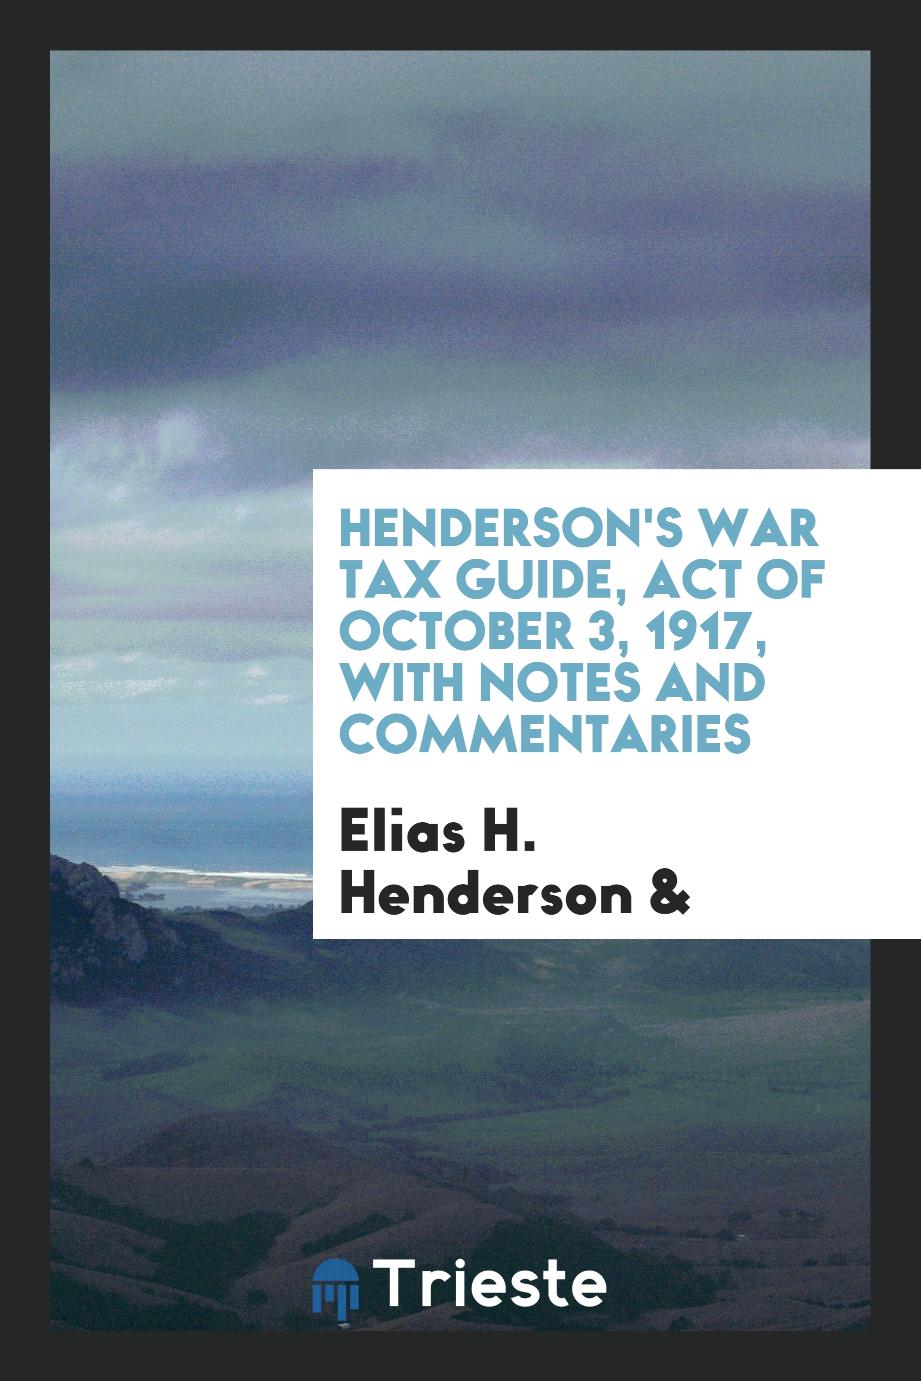 Henderson's war tax guide, act of October 3, 1917, with notes and commentaries